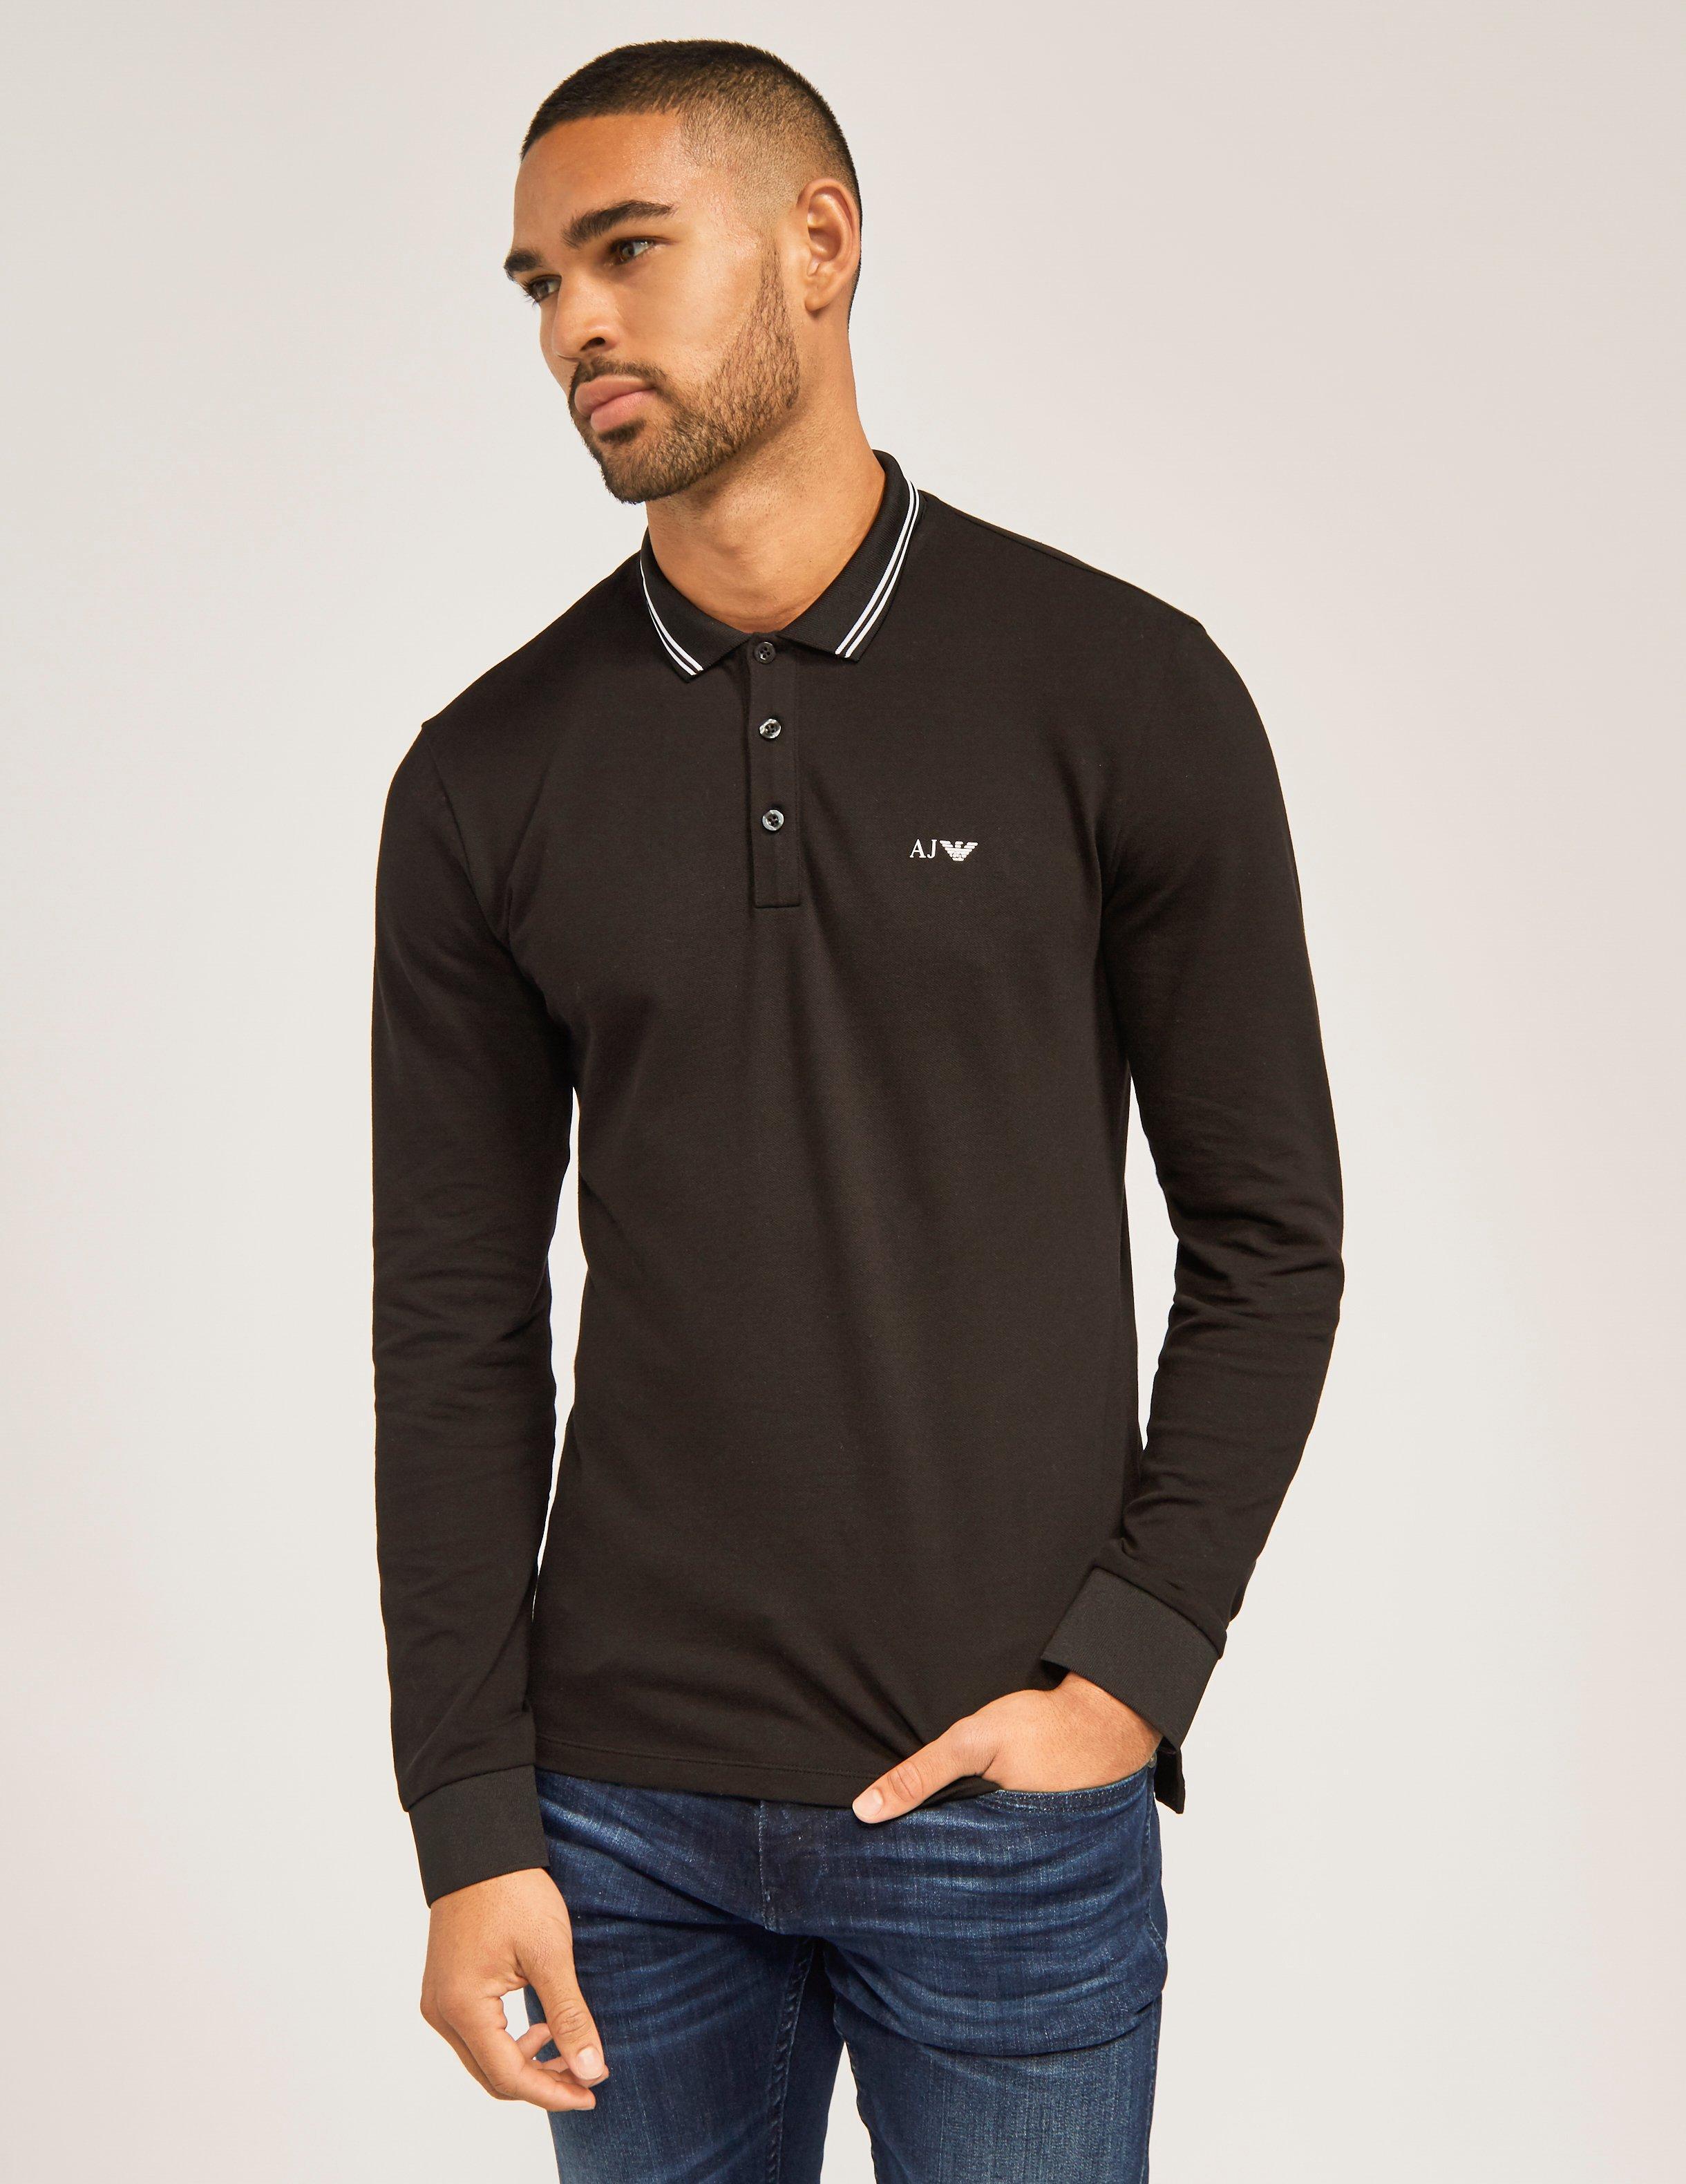 Armani Jeans Cotton Modern Fit Long Sleeve Shirt in for Men -